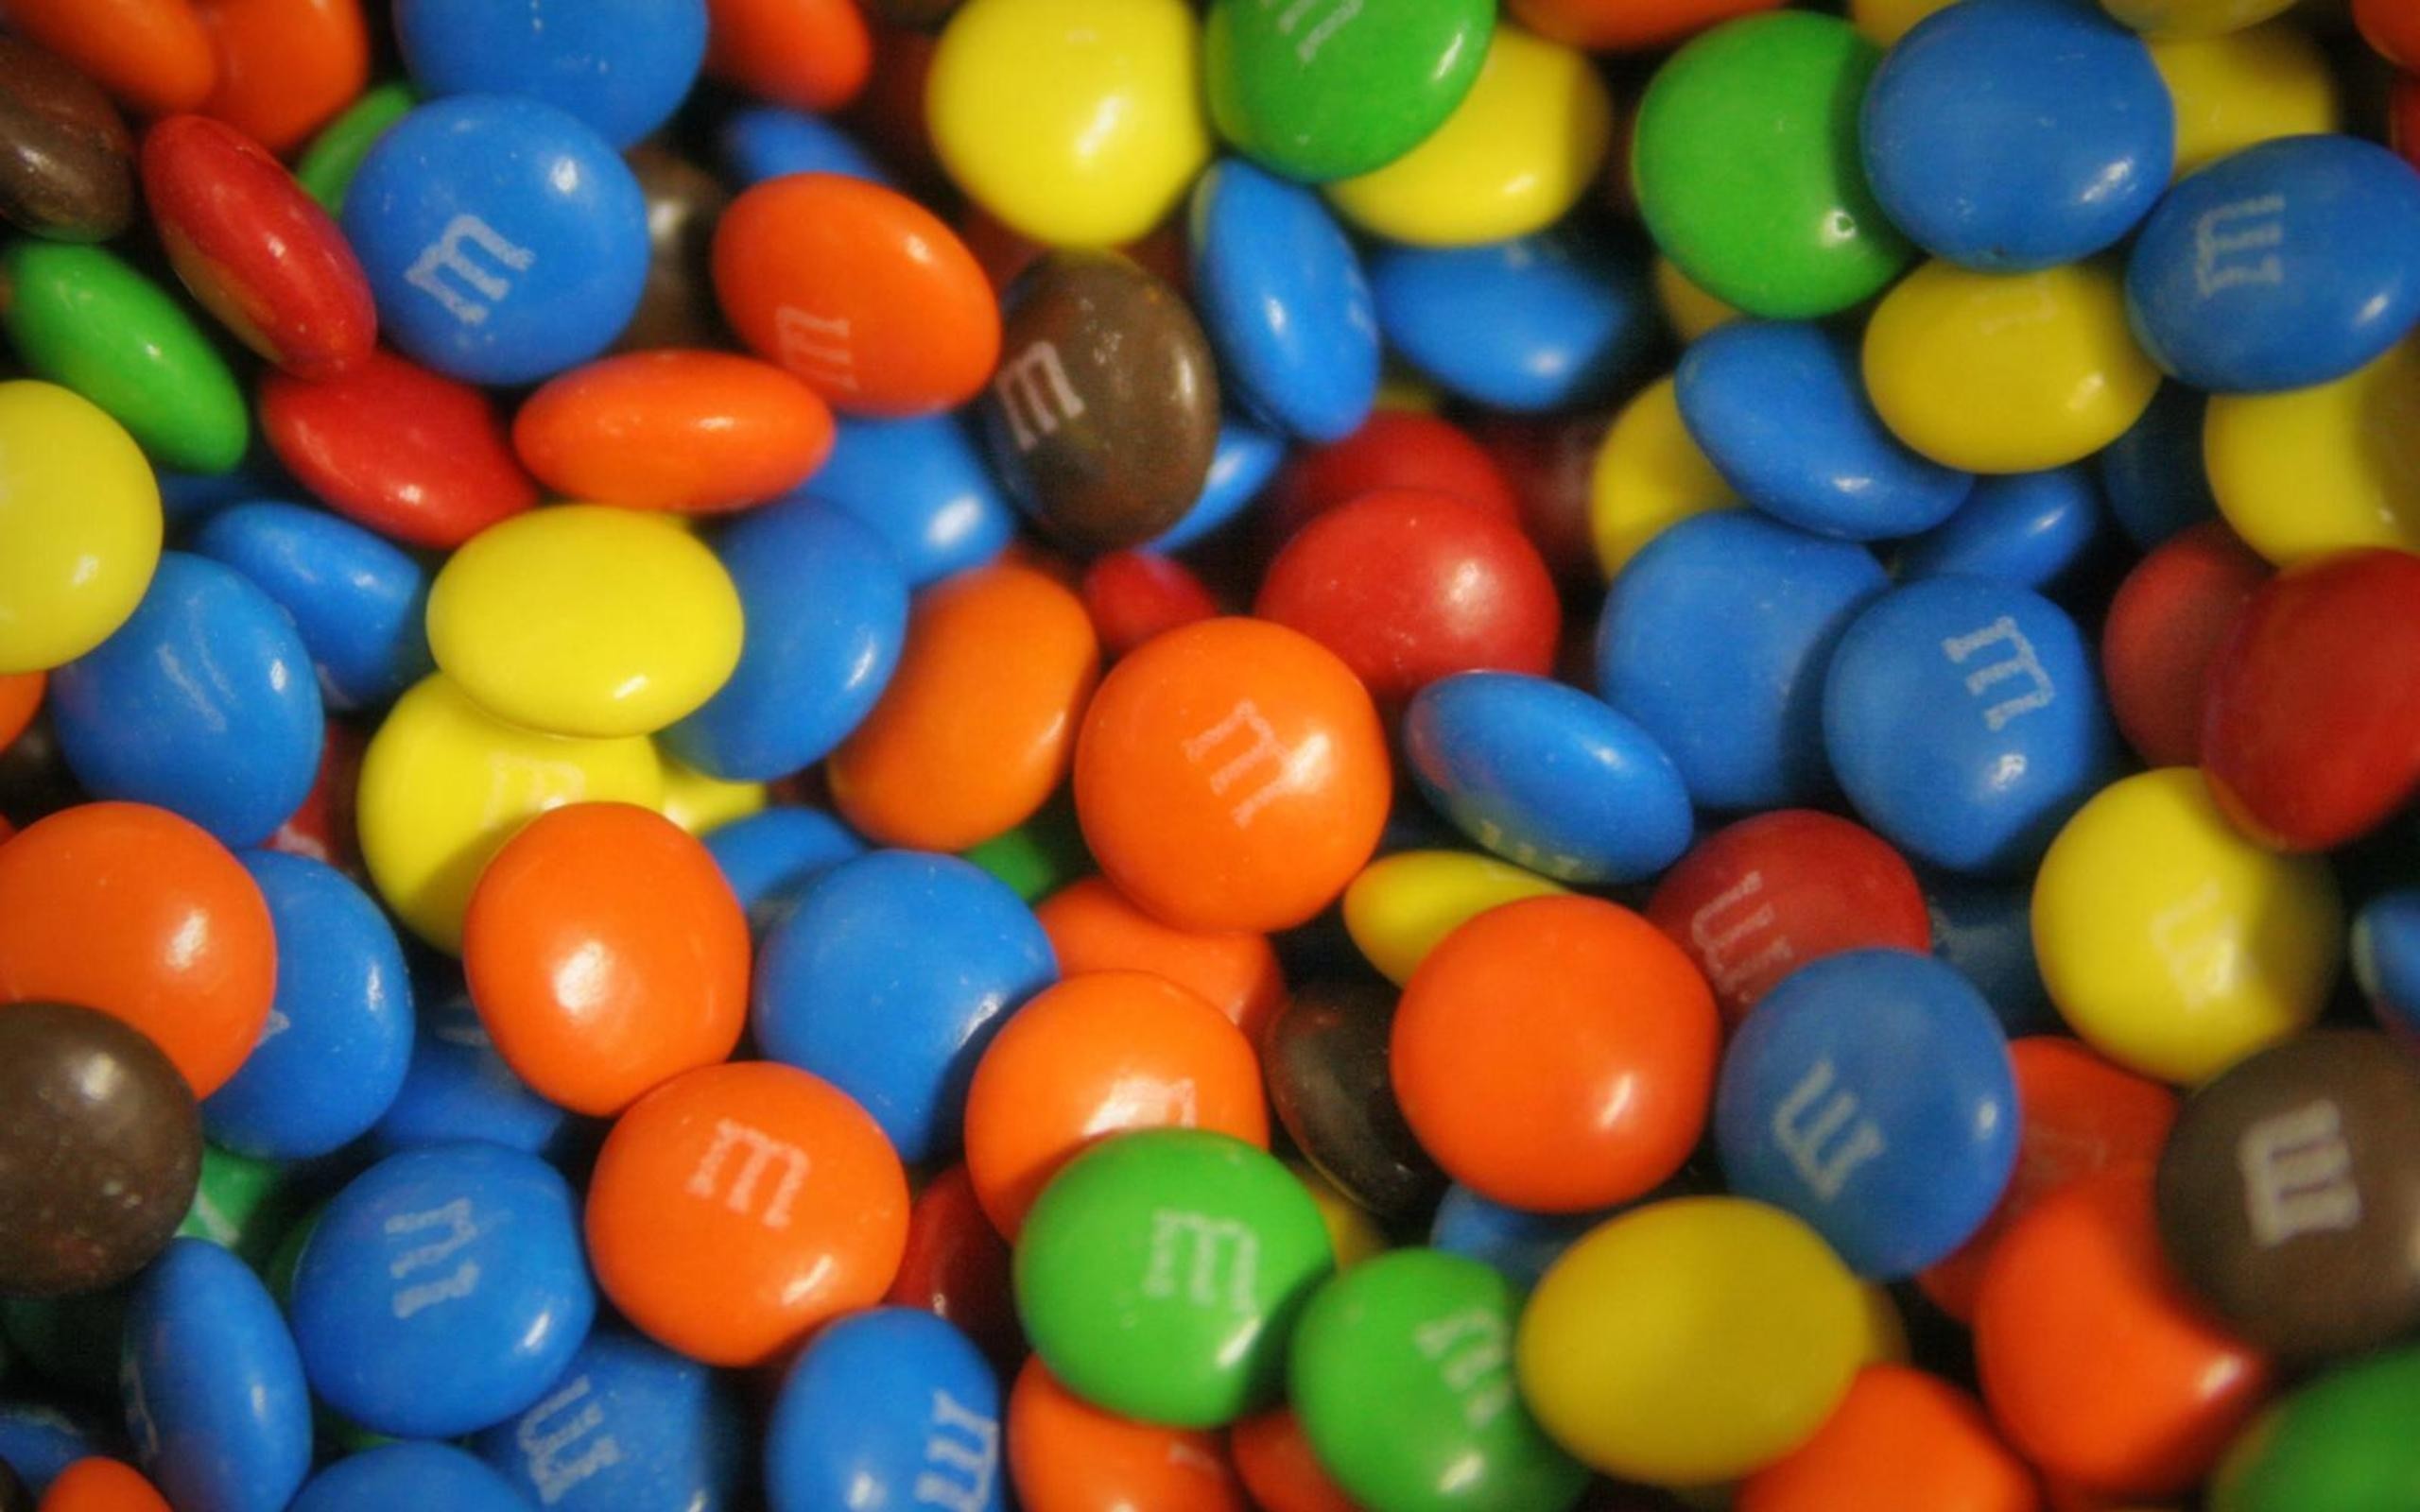 Wallpaper, sweets, Toy, dessert, Confectionery, color, candy, sweetness, snack food, jelly bean 2560x1600